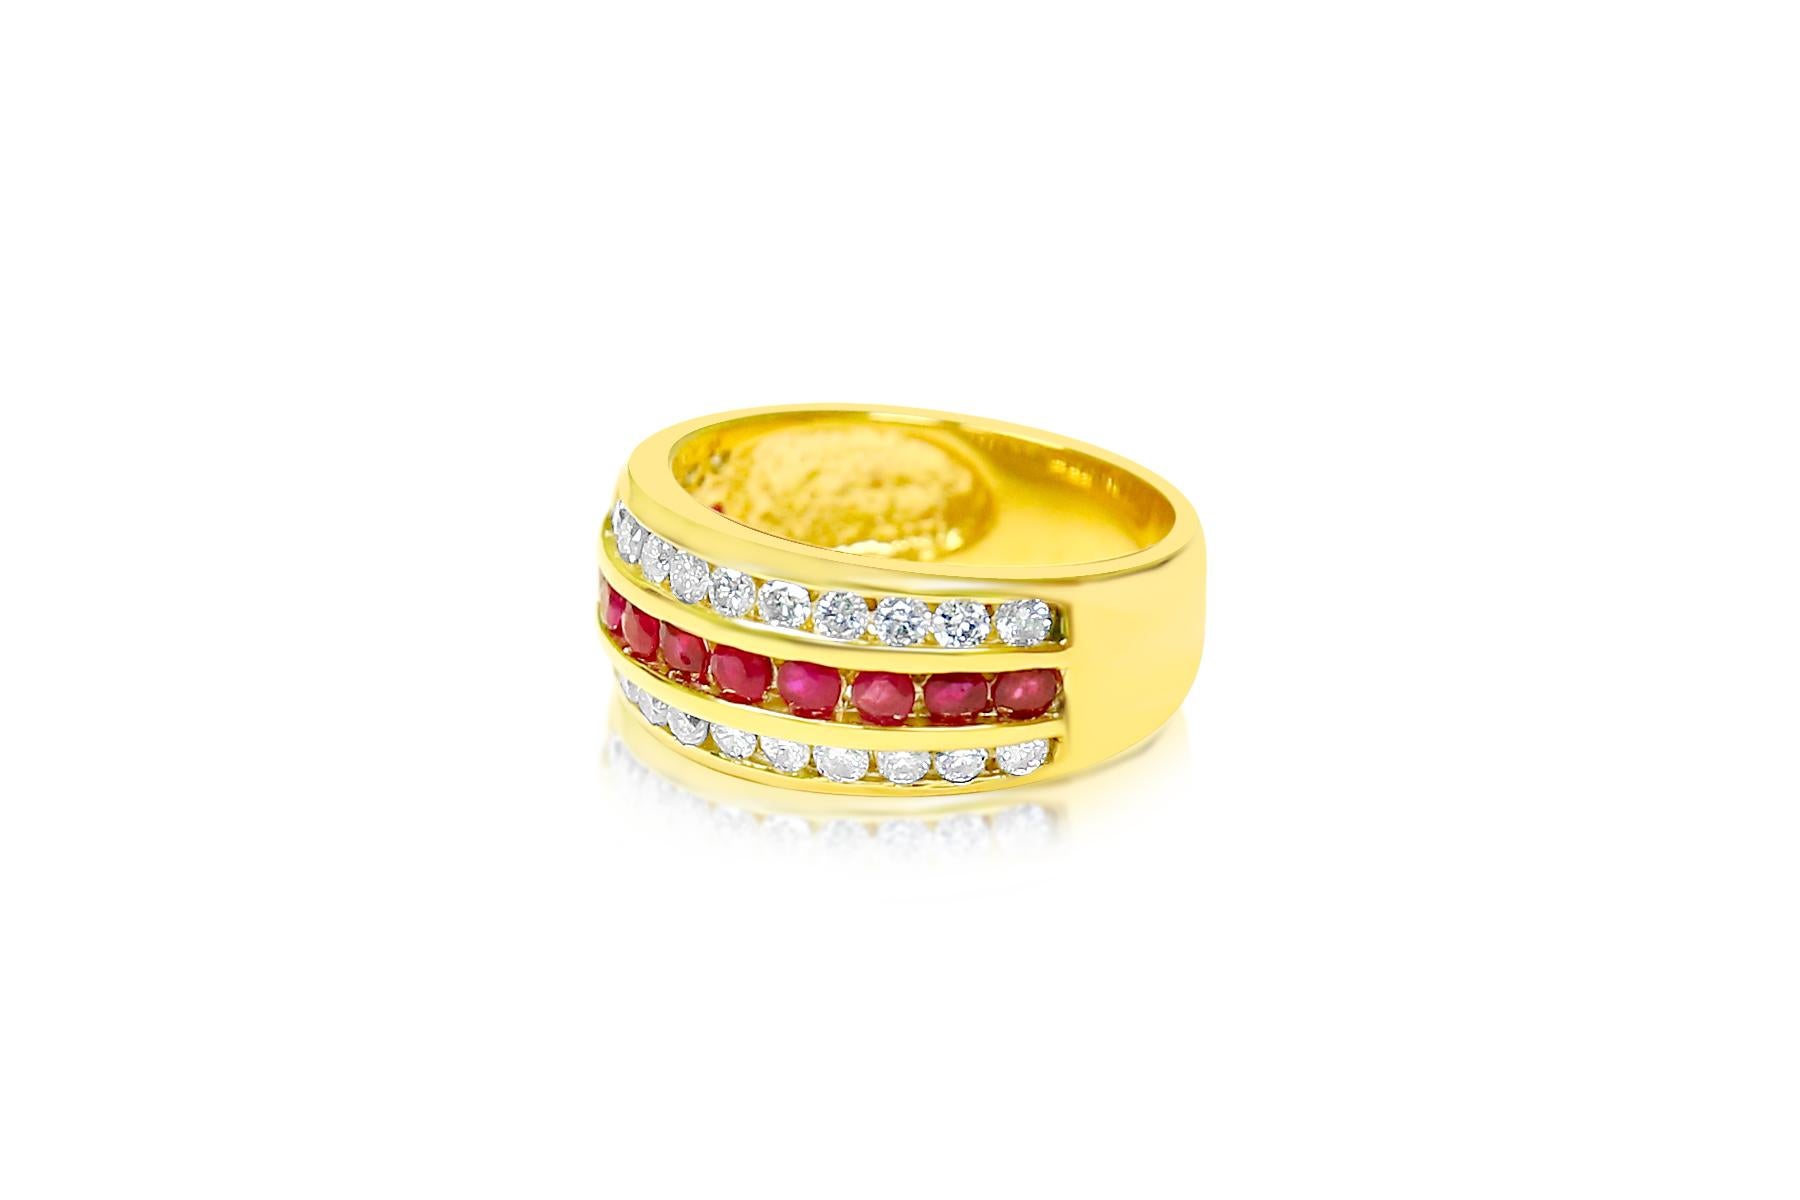 Brilliant Cut 14k Yellow Gold, 2.25ct Diamond and Burma Ruby Ring. For Sale